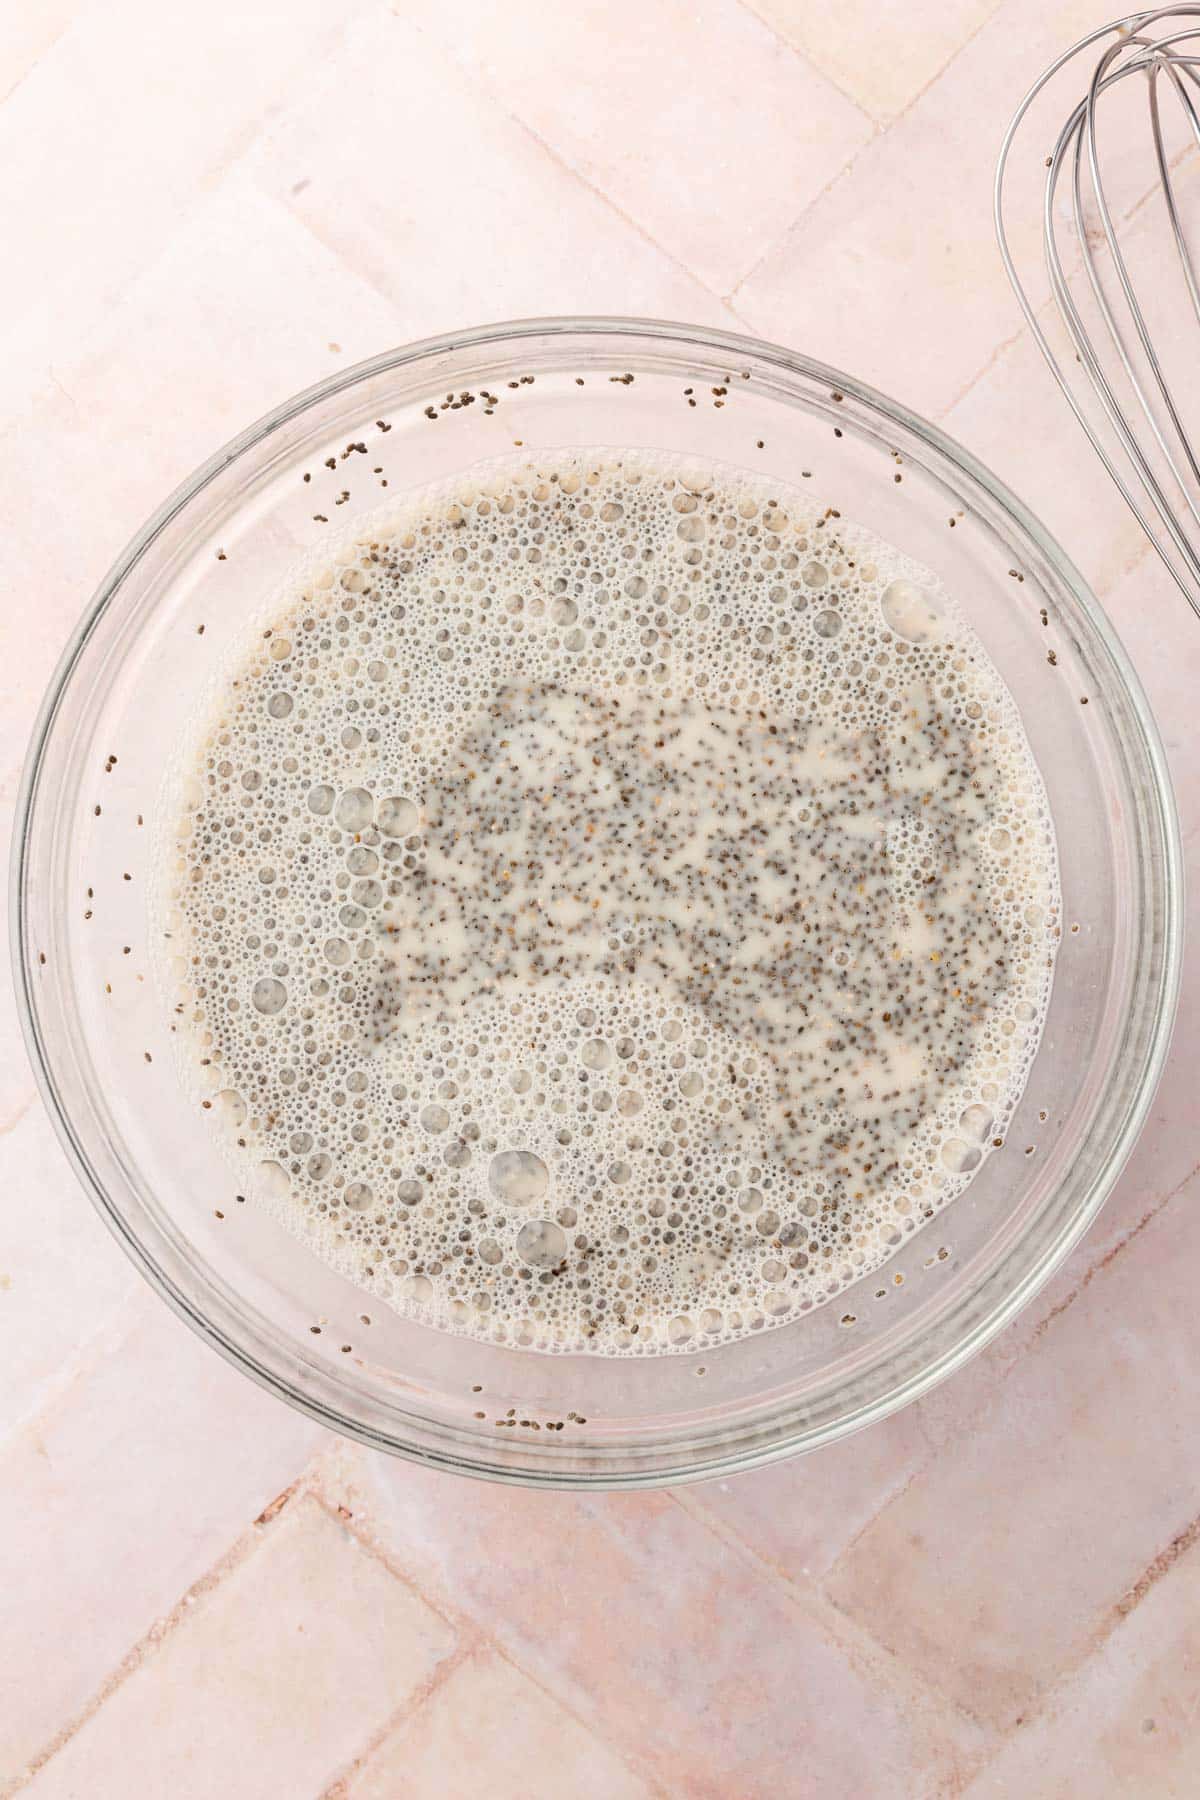 A glass mixing bowl of almond milk and chia seeds that have been whisked together before chilling in the refrigerator.